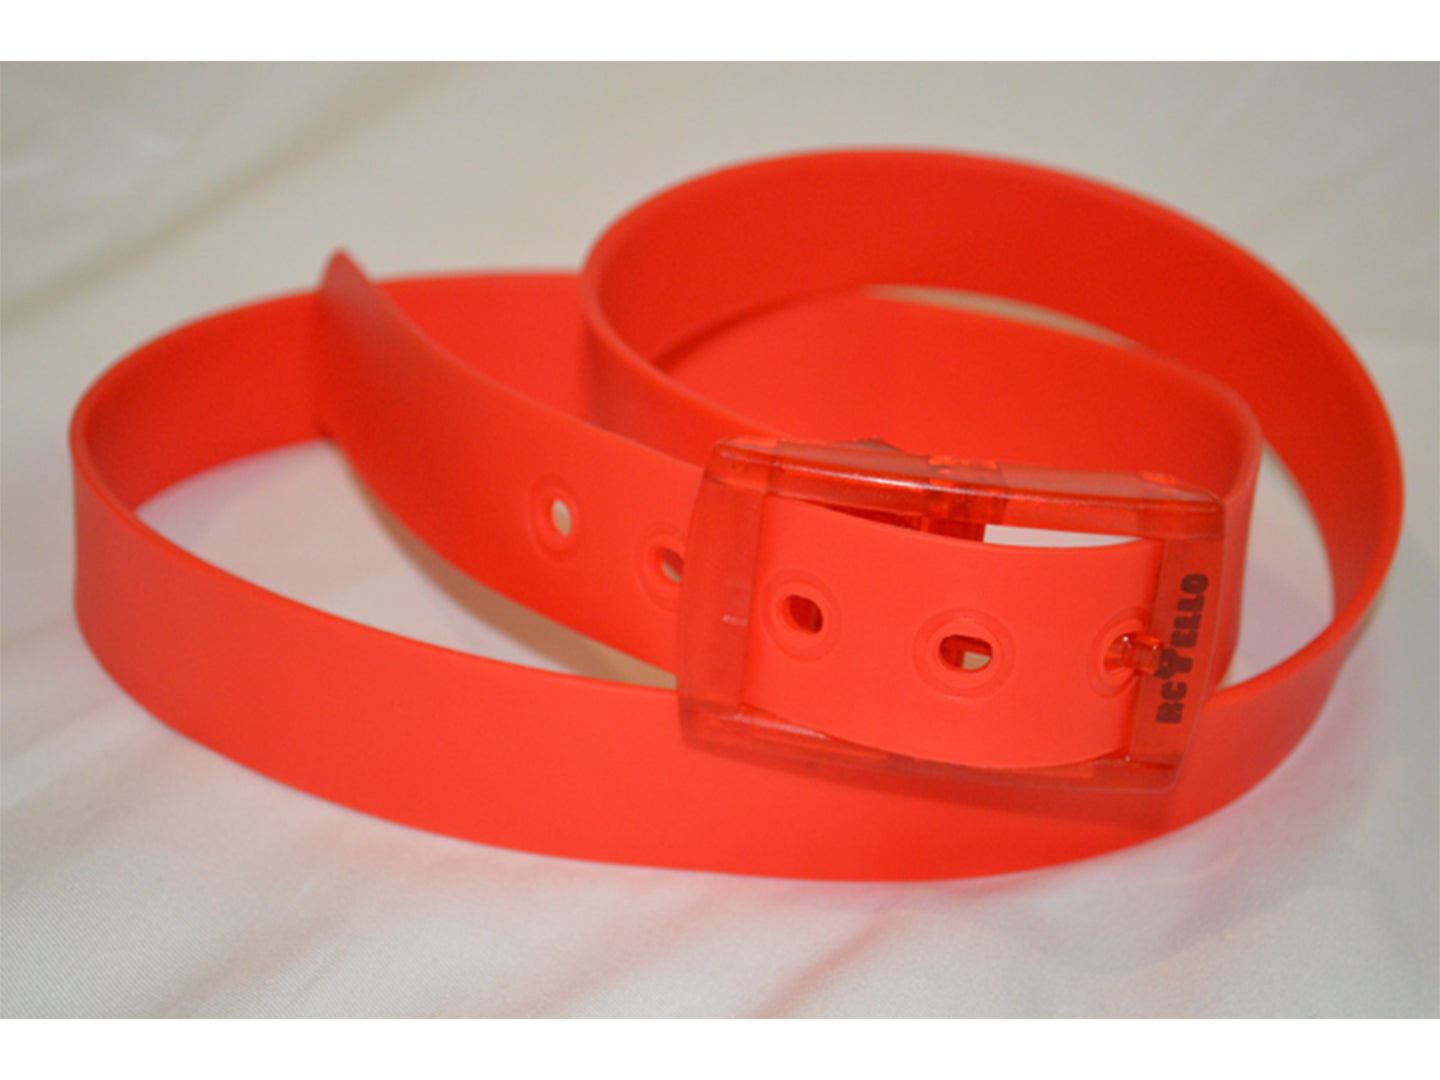 Scented Belts